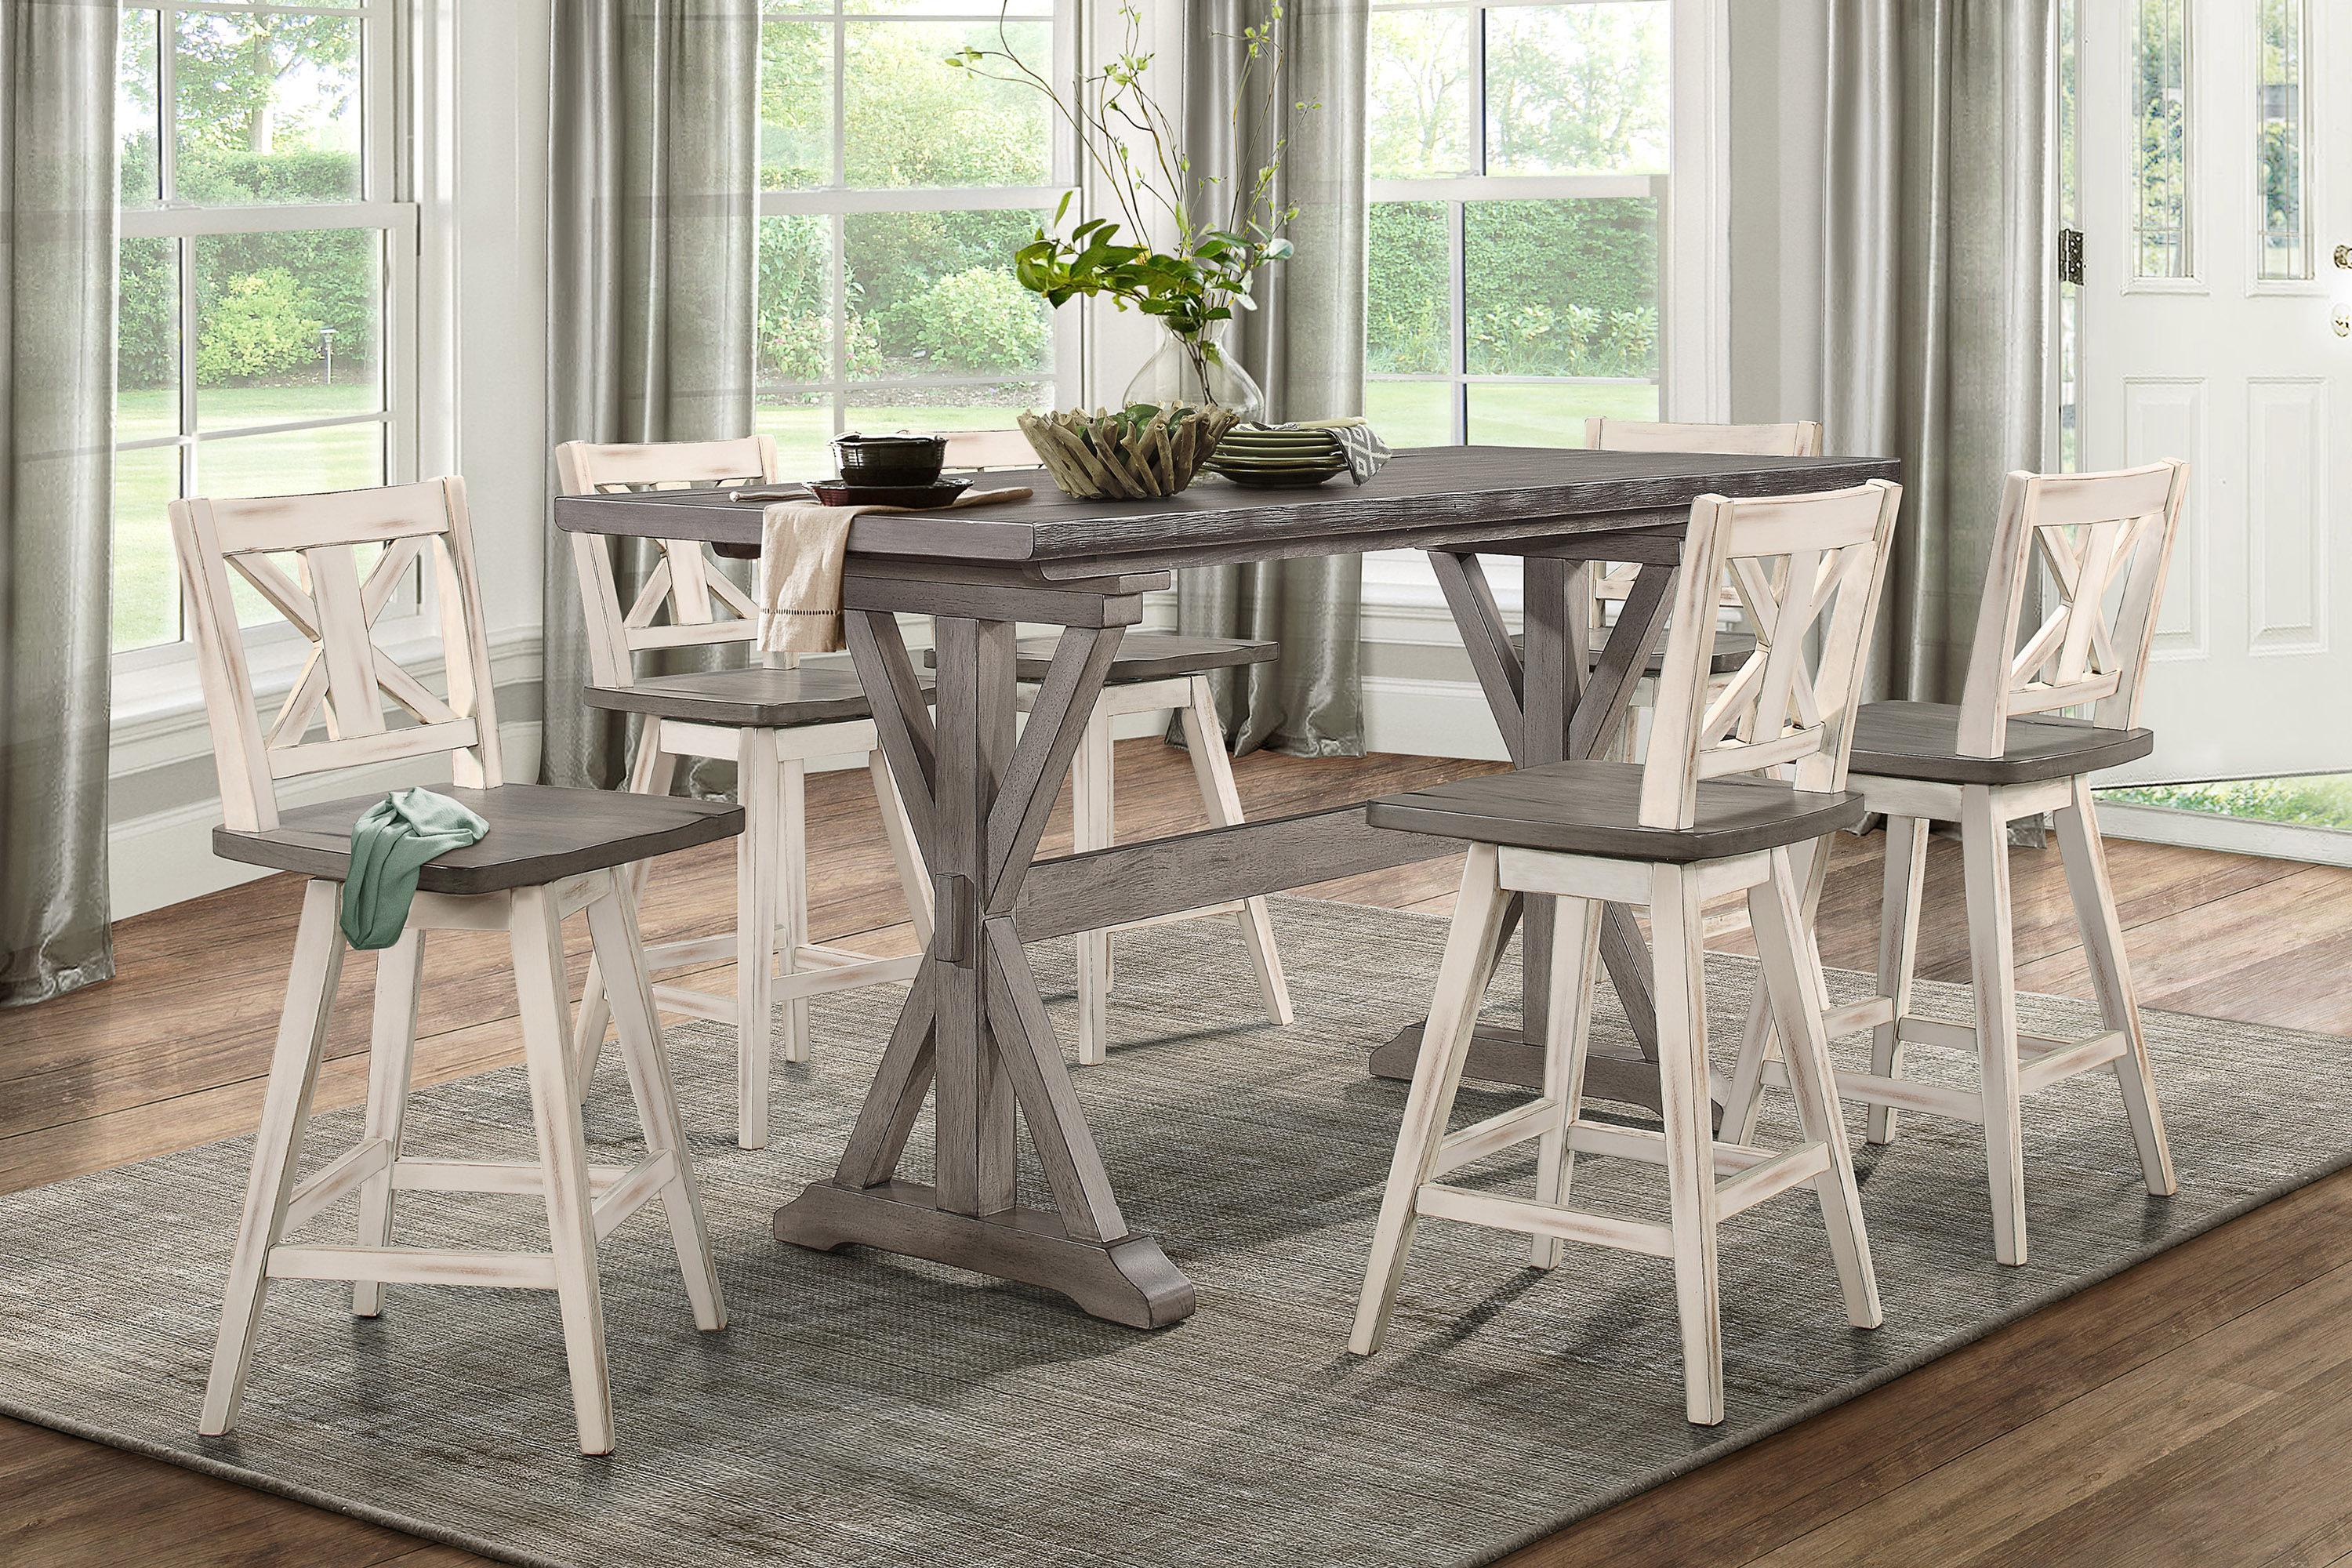 

    
Rustic Distressed Gray & White Solid Wood 29" Dining Room Set 5pcs Homelegance 5602-36-5PC Amsonia
